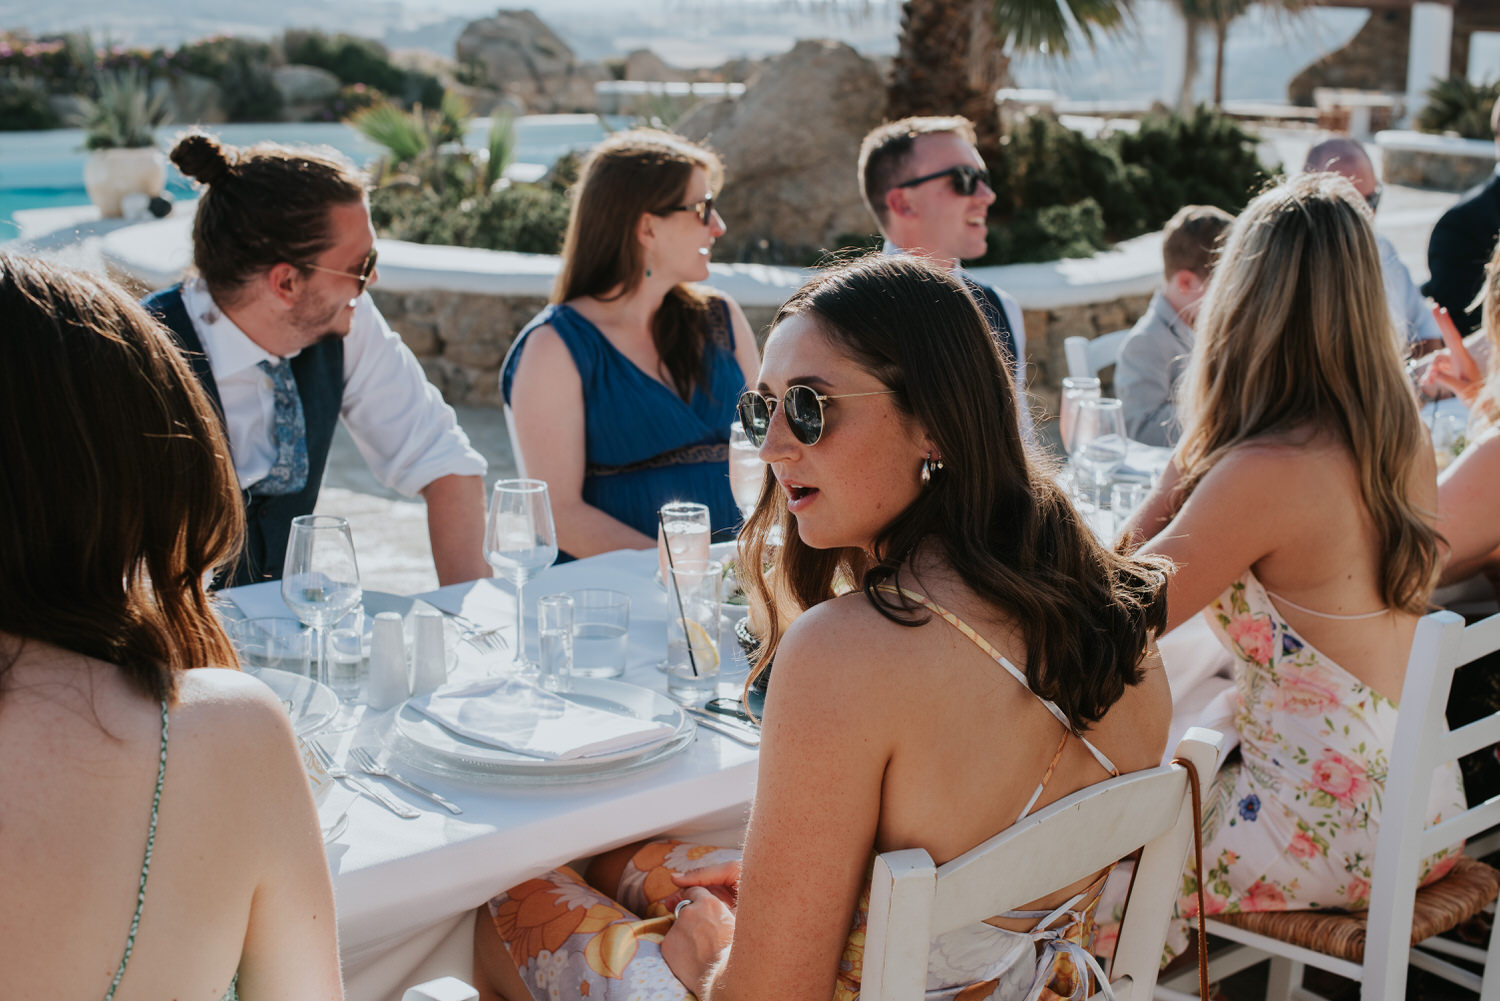 Mykonos wedding photographer: guests sat chatting at the reception table basked in the sun.